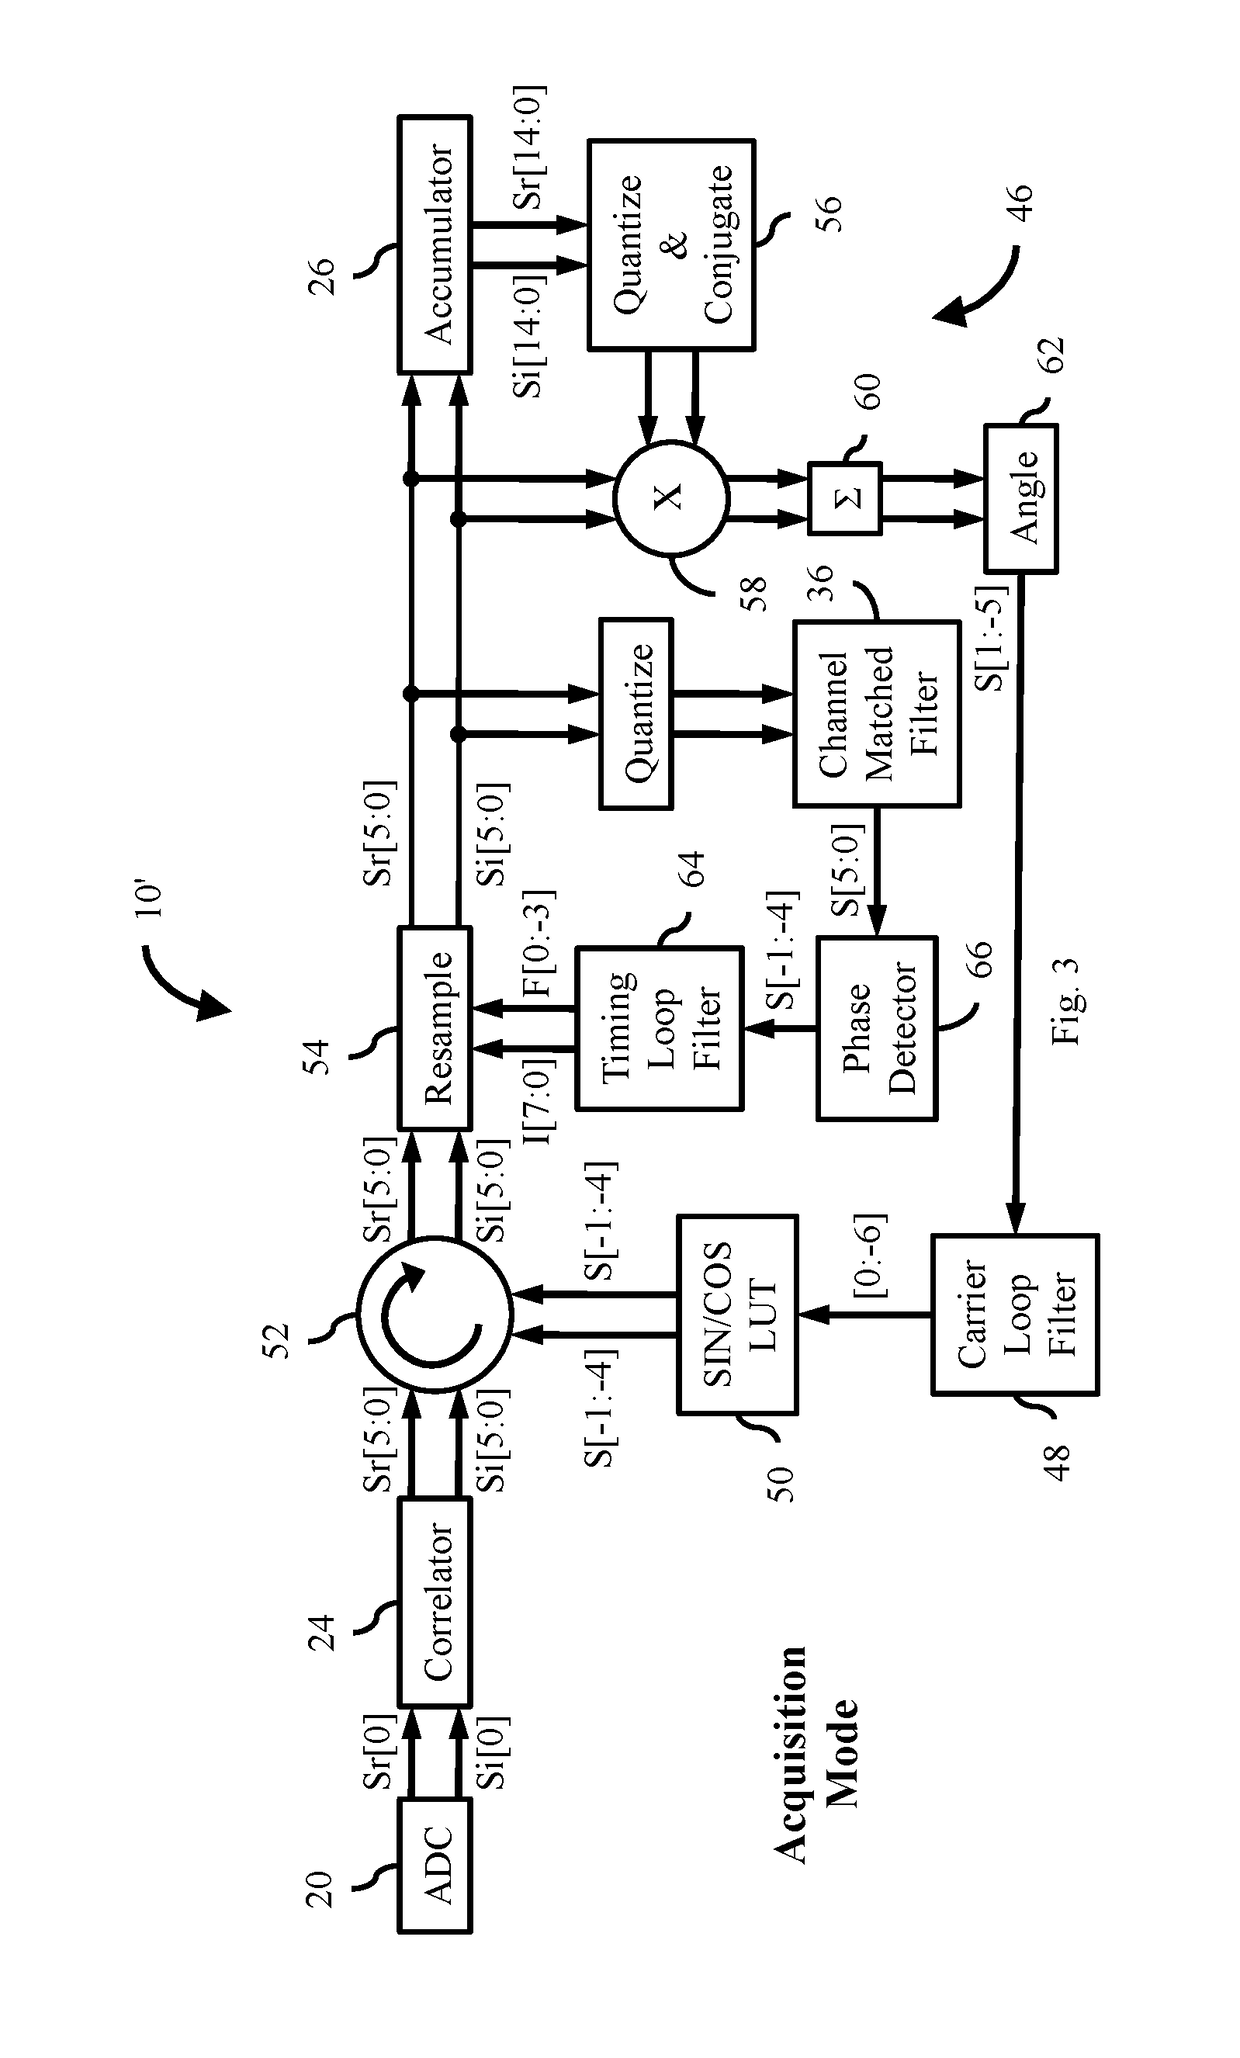 Receiver for use in an ultra-wideband communication system